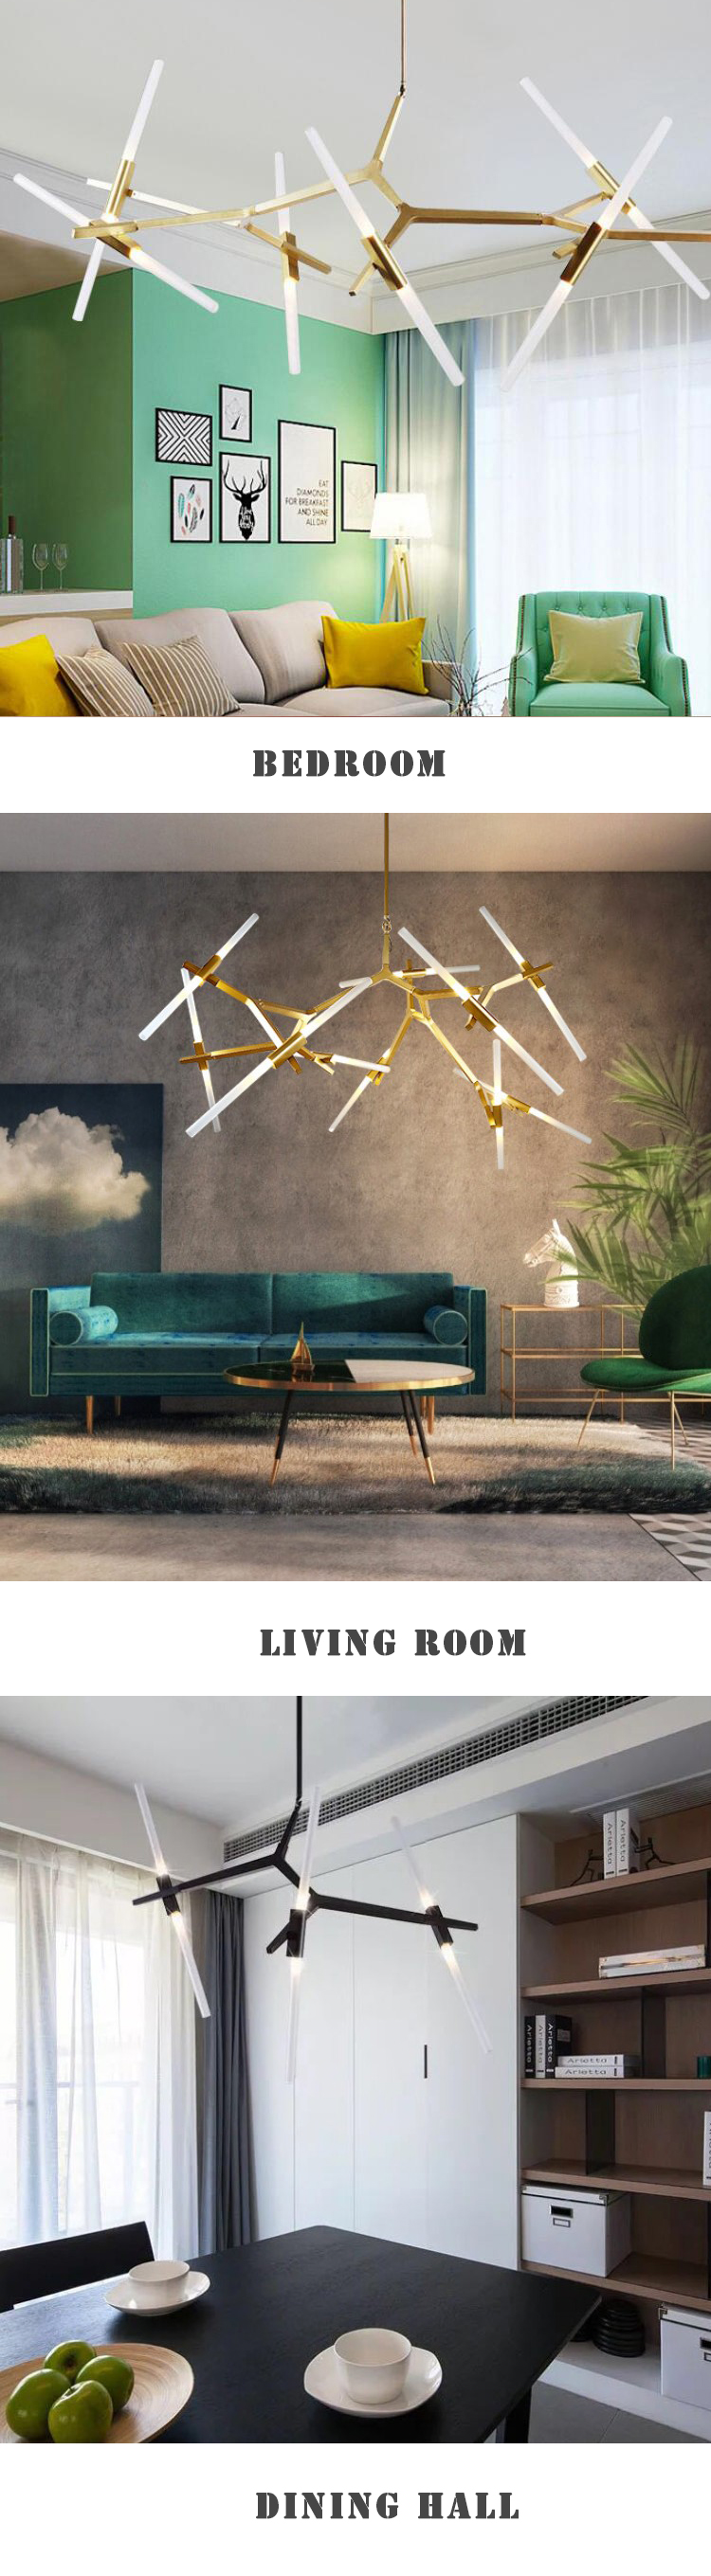 2019 new design china product chandelier lighting